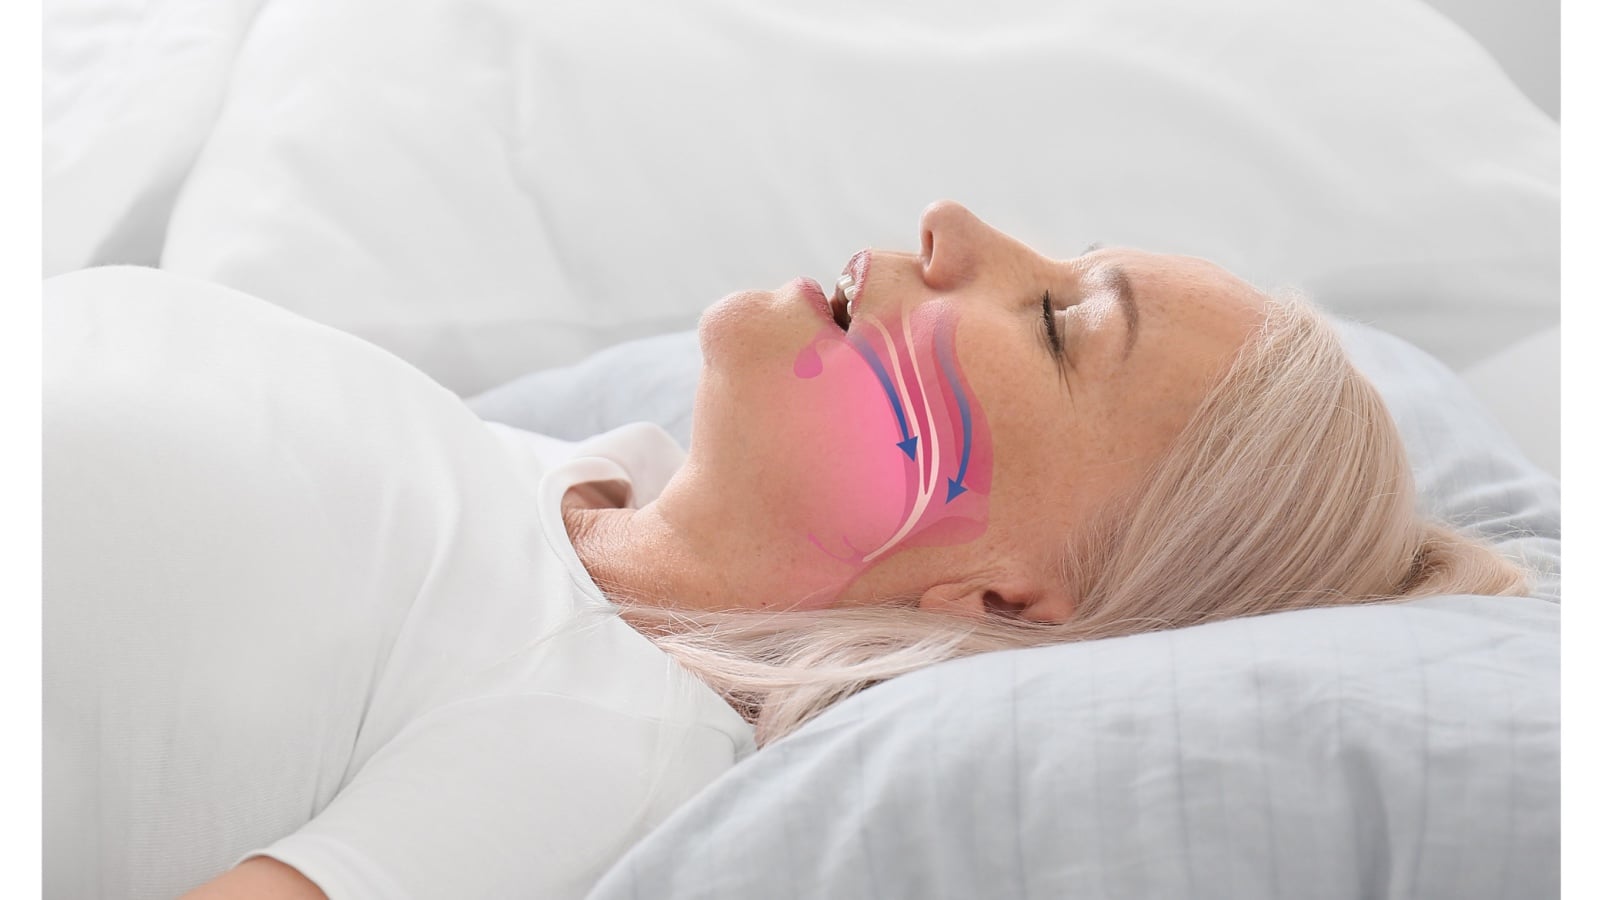 <p>Snoring results from obstructed airways during sleep. Common causes include poor muscle tone in the throat, excessive throat tissue, or an elongated soft palate or uvula.</p> <p>It can also indicate underlying health issues such as nasal congestion from sinus infections or allergies, nasal polyps, or a deviated septum.</p>